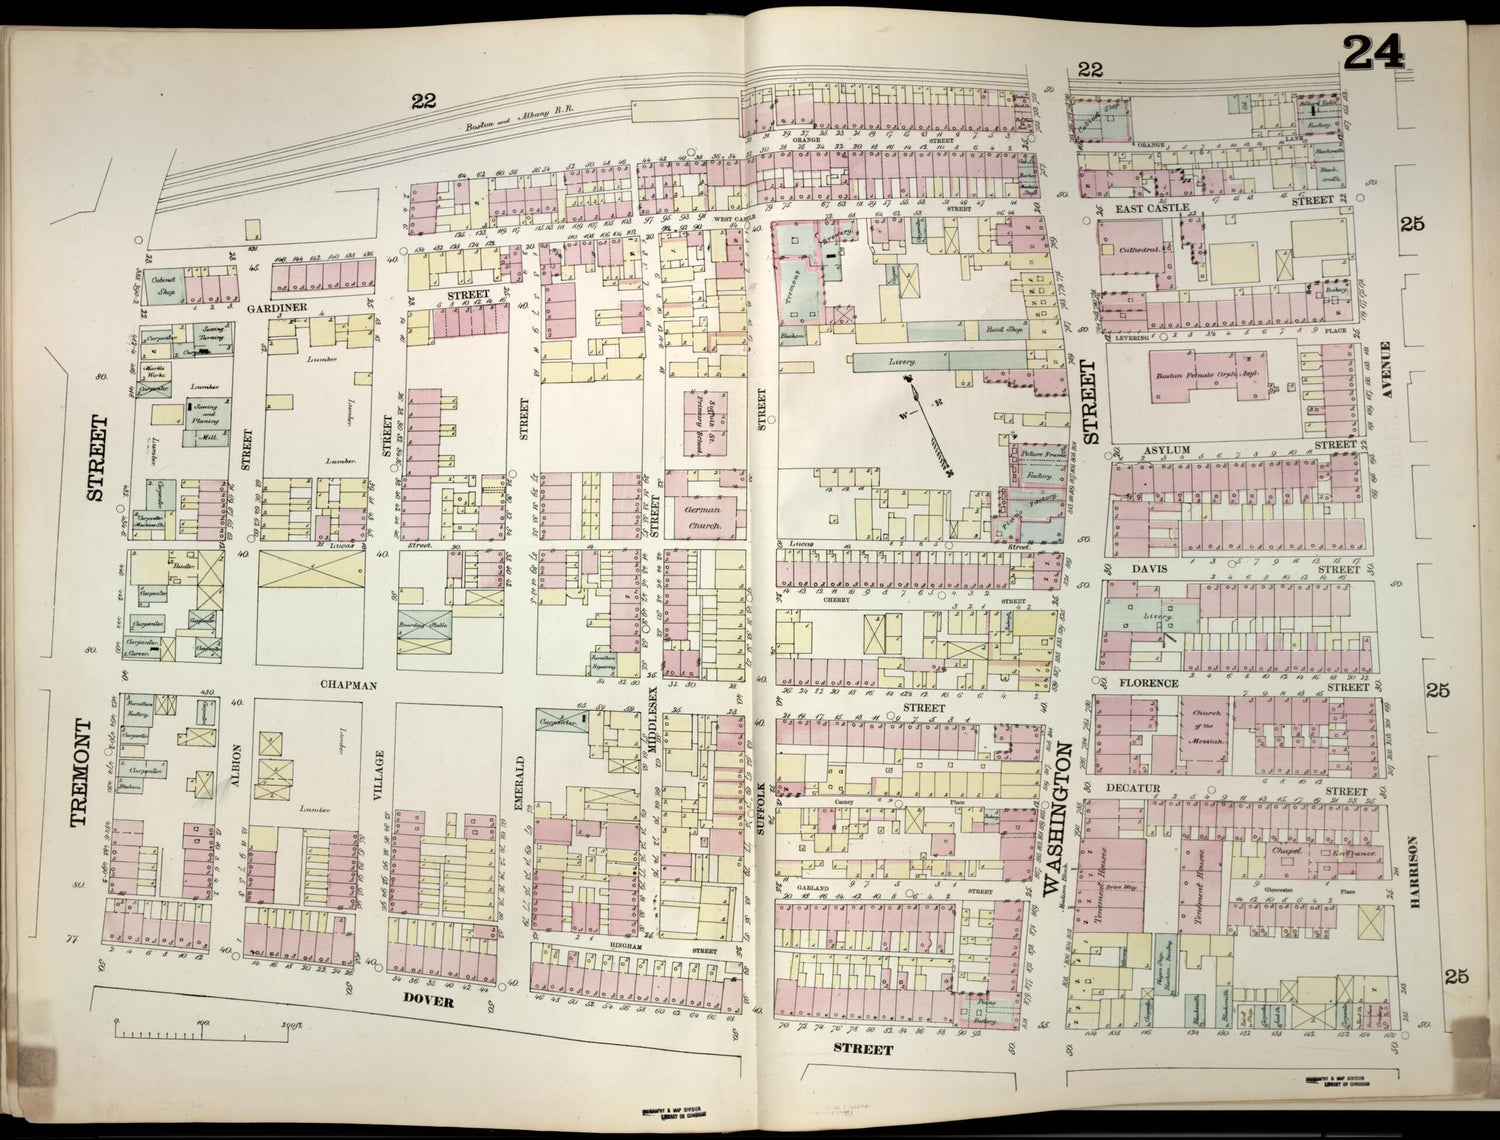 This old map of Image 25 of Boston from Insurance Map of Boston. Volume 1 from 1867 was created by D. A. (Daniel Alfred) Sanborn in 1867